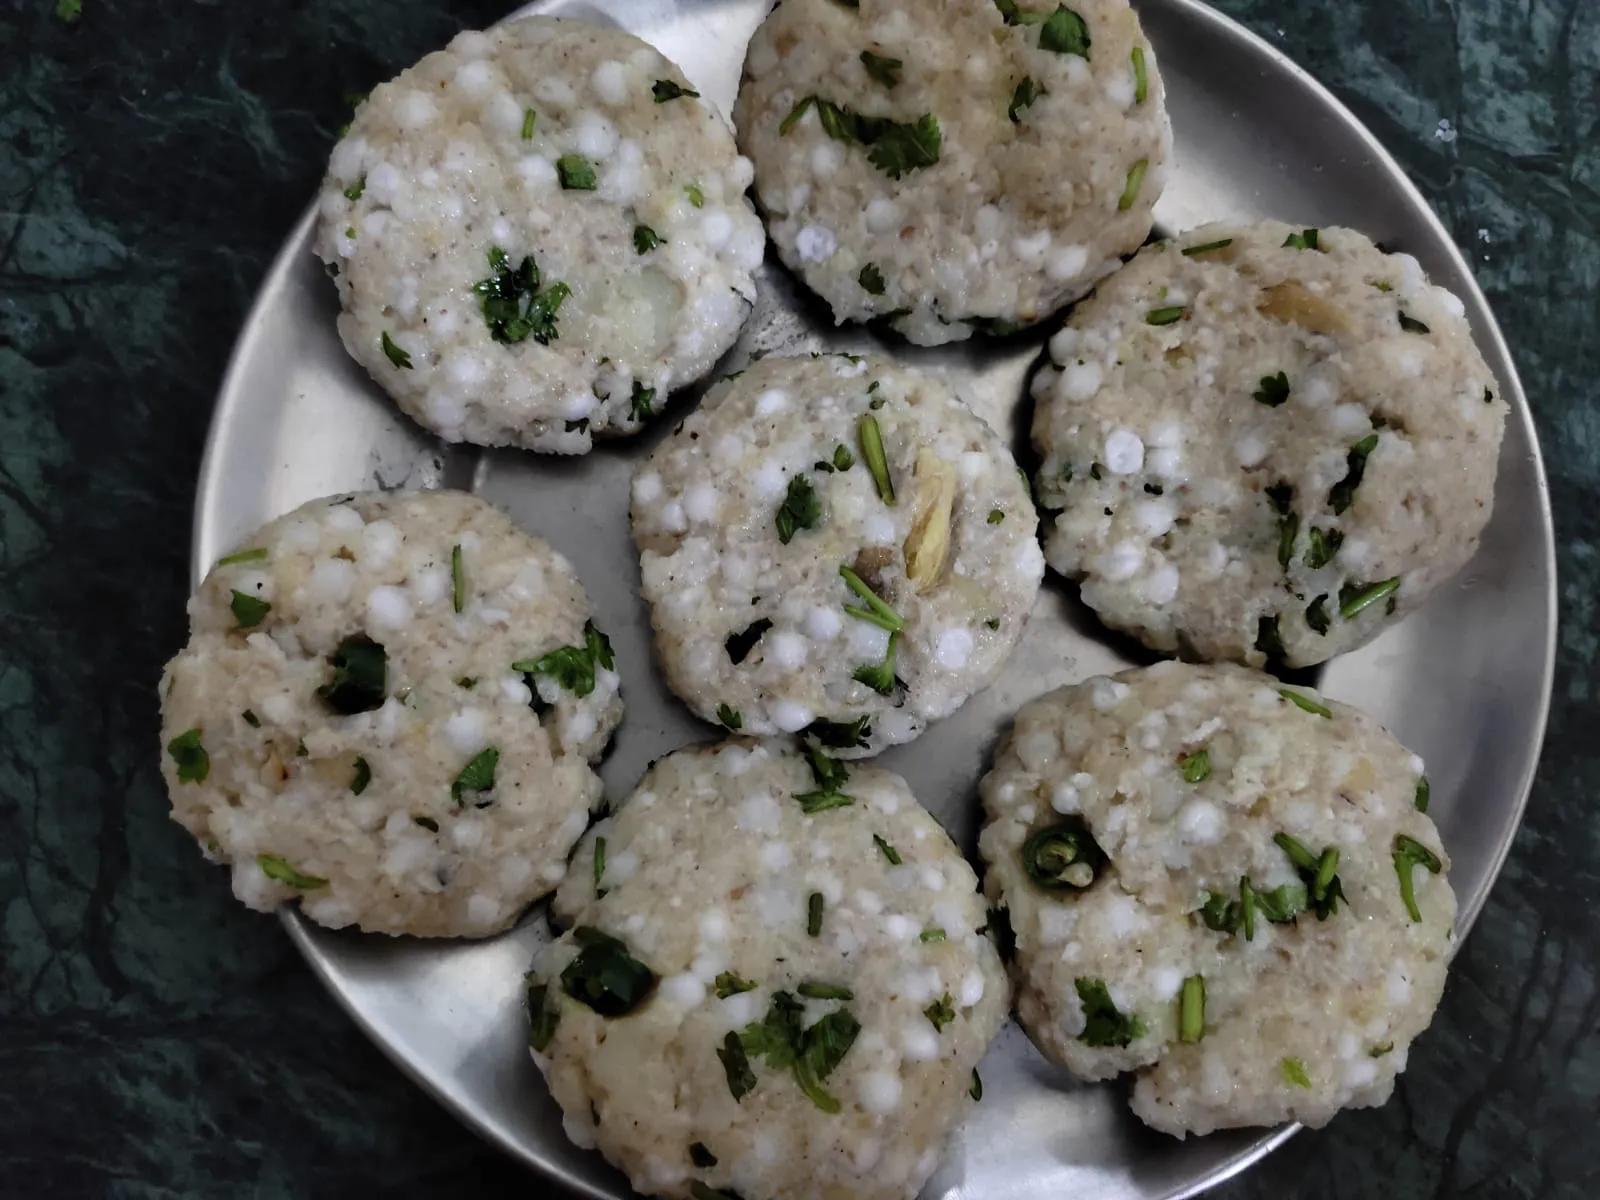 tikkis for sabudana vada rolled out in a plate